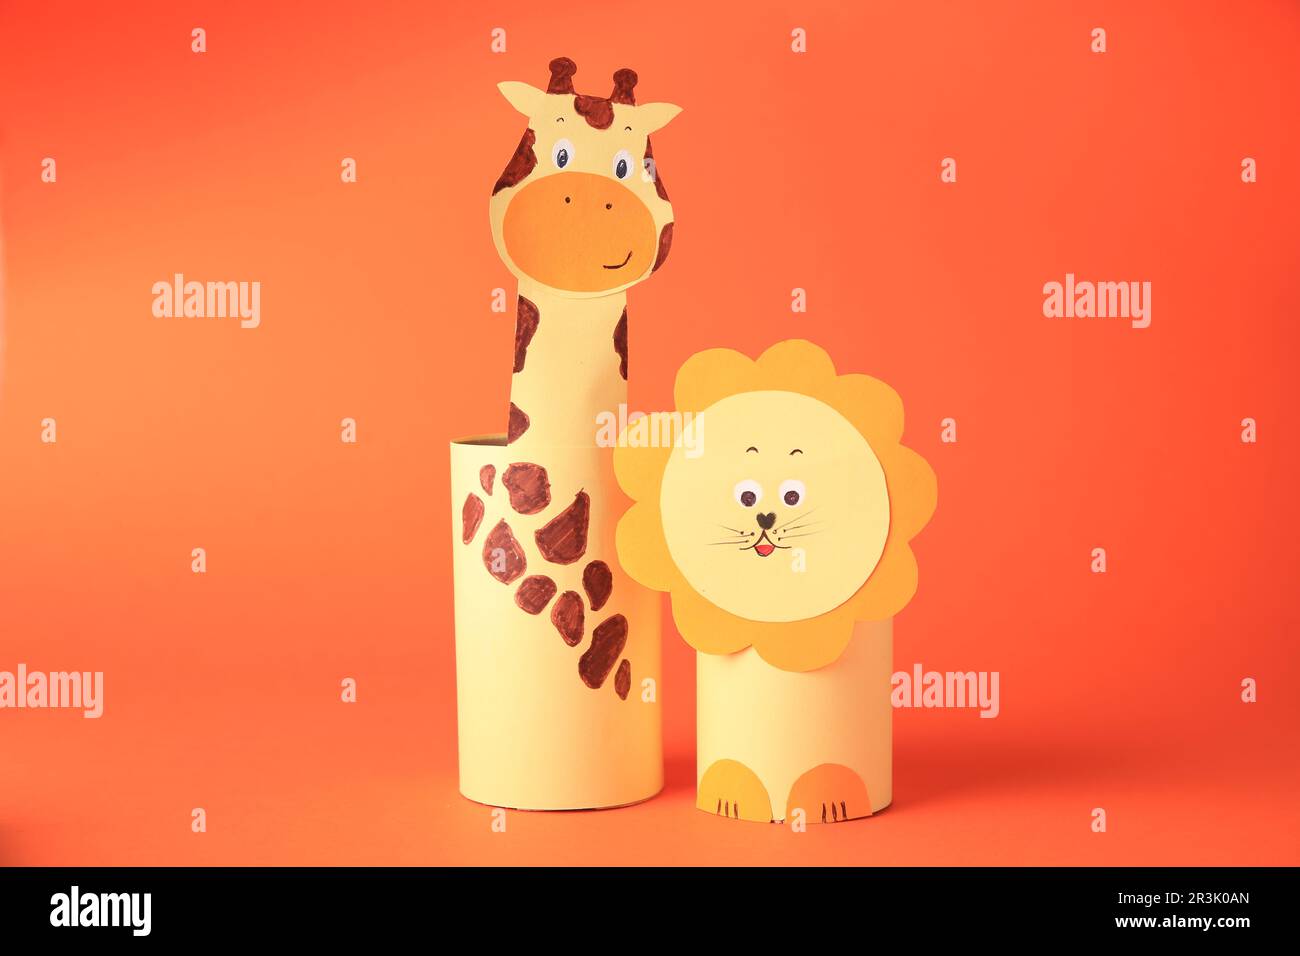 Toy giraffe and lion made from toilet paper hubs on orange background. Children's handmade ideas Stock Photo